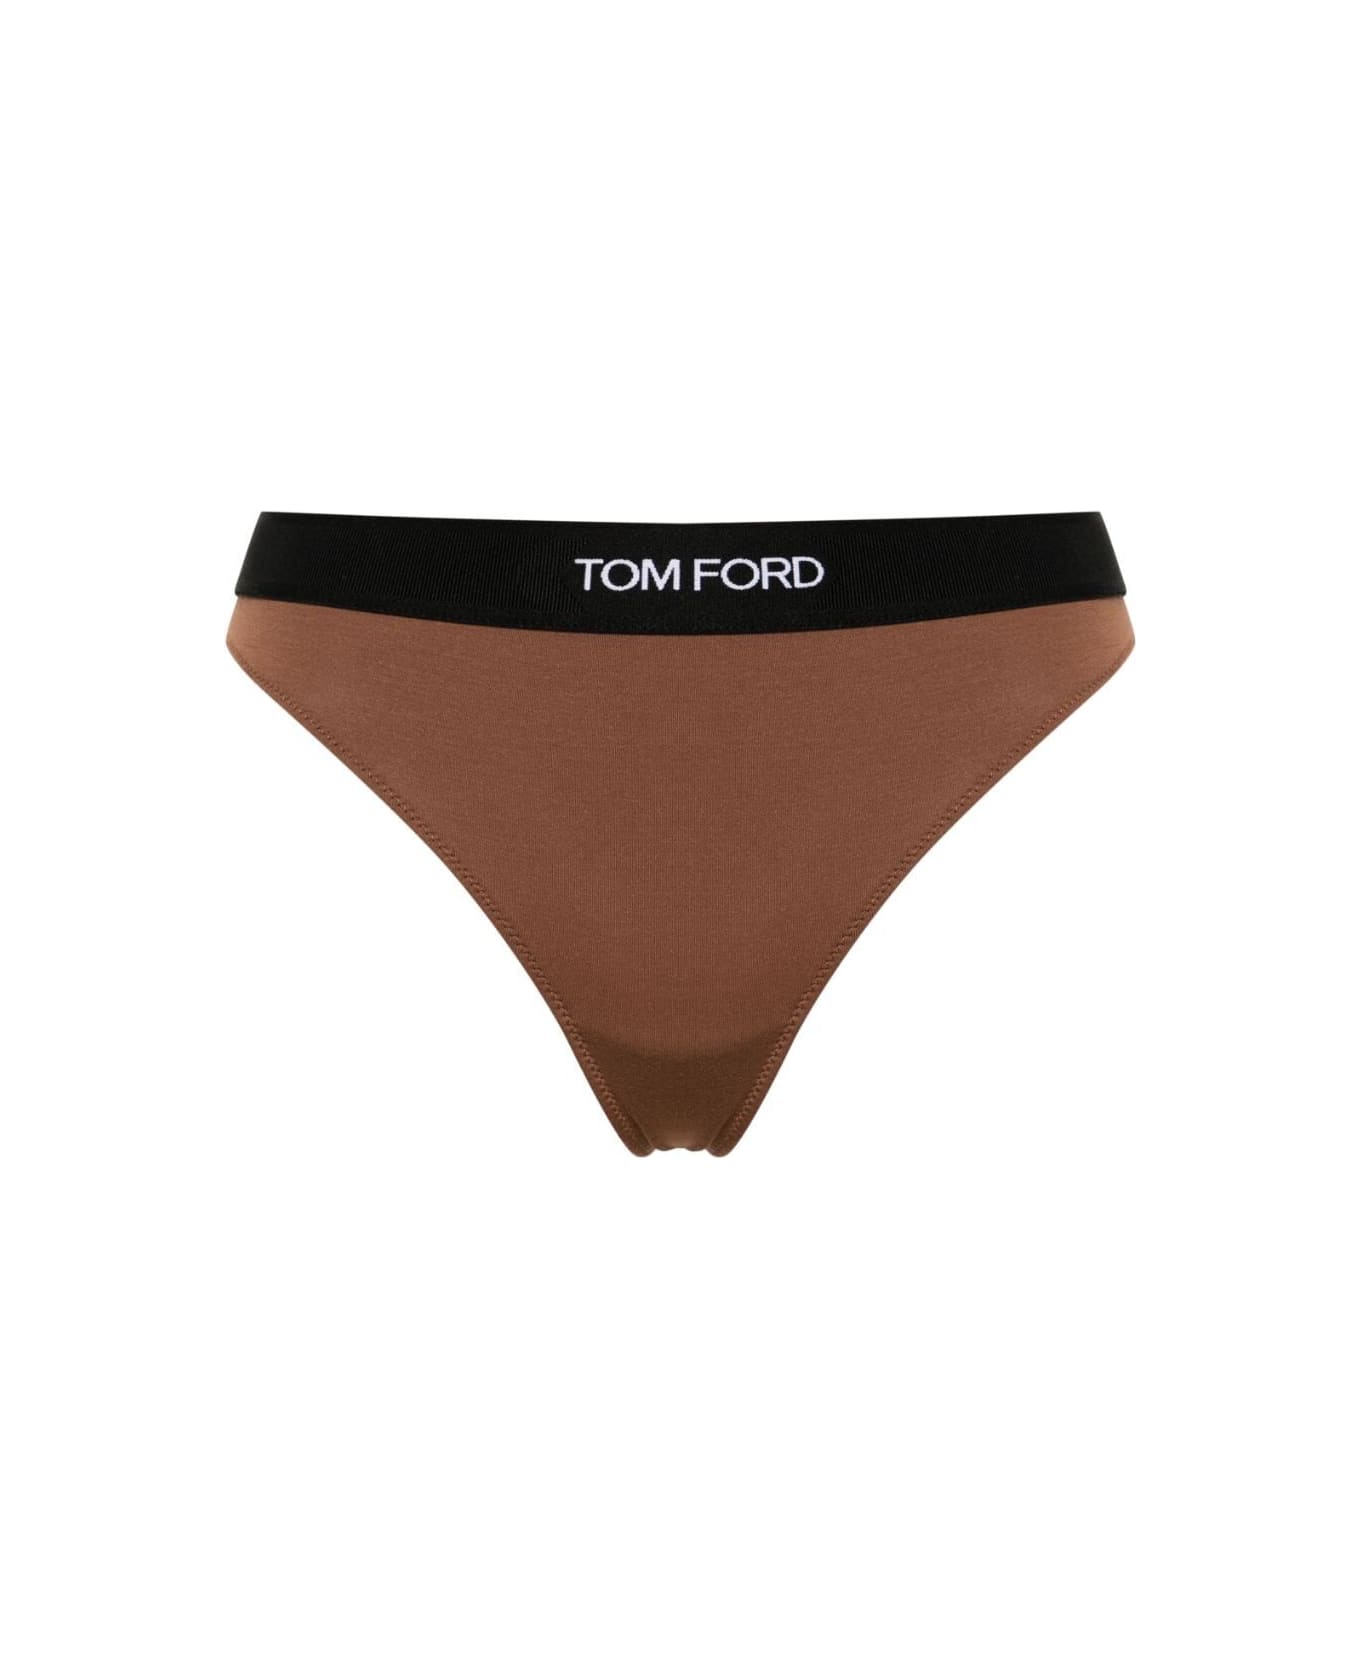 Tom Ford Modal Signature Thong - Cocoa Brown